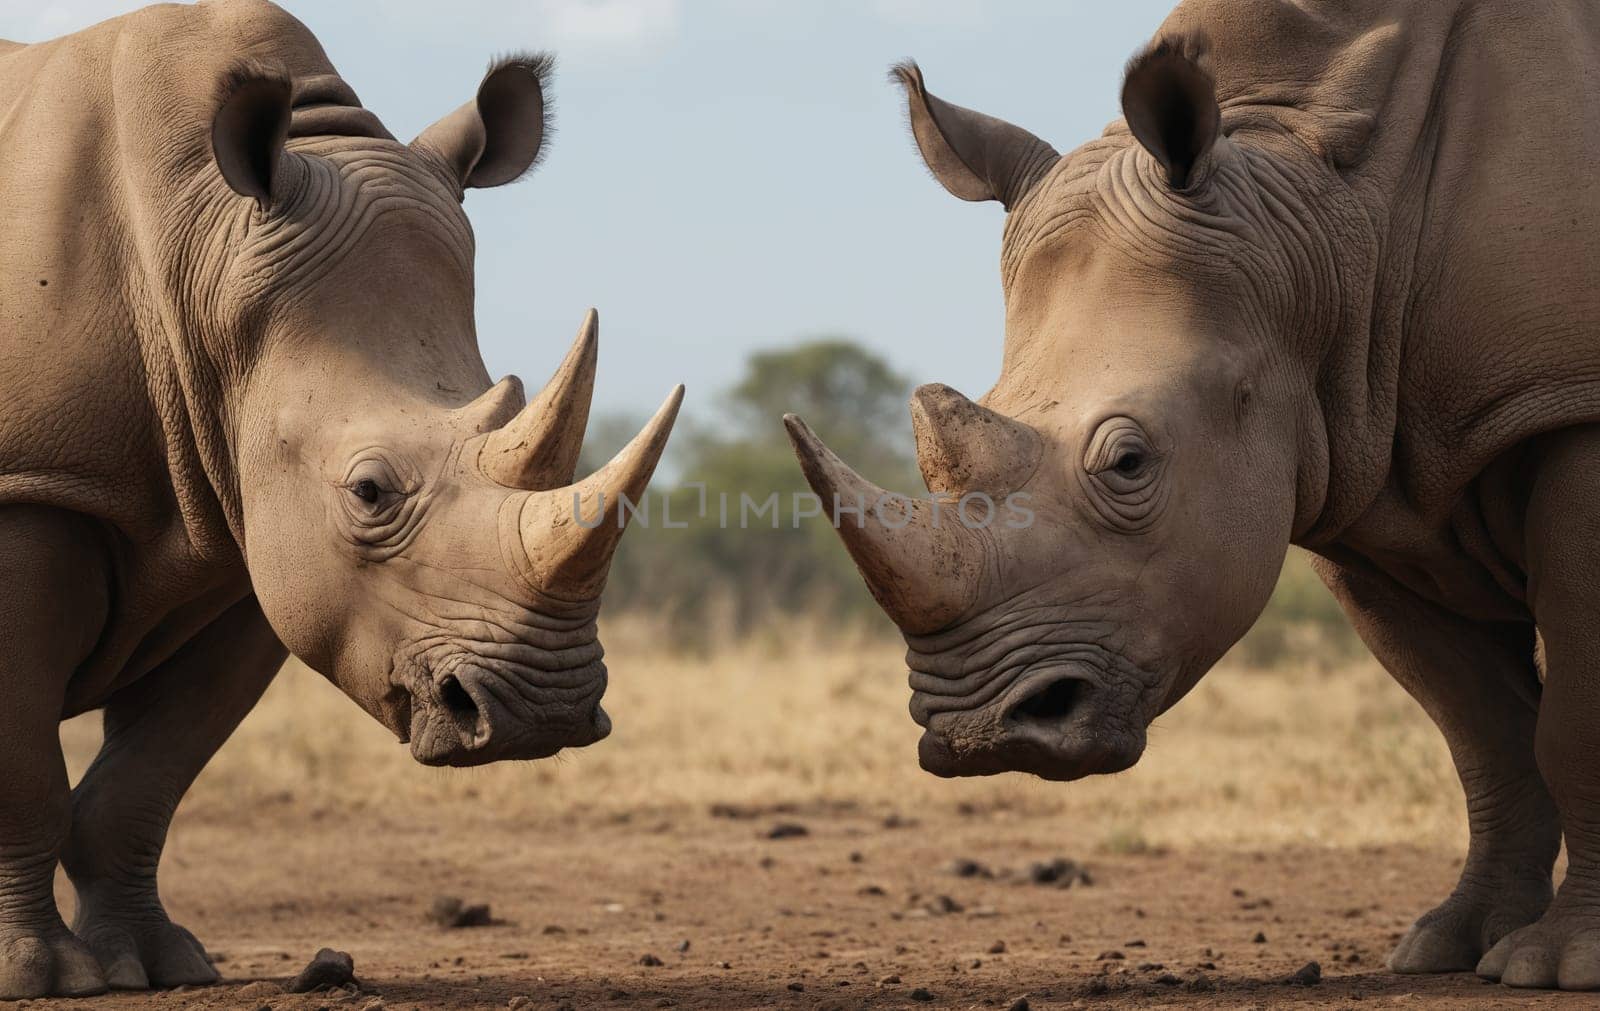 Two white rhinoceros stand together on a dusty path in their natural habitat. These terrestrial animals showcase their adaptation to the environment